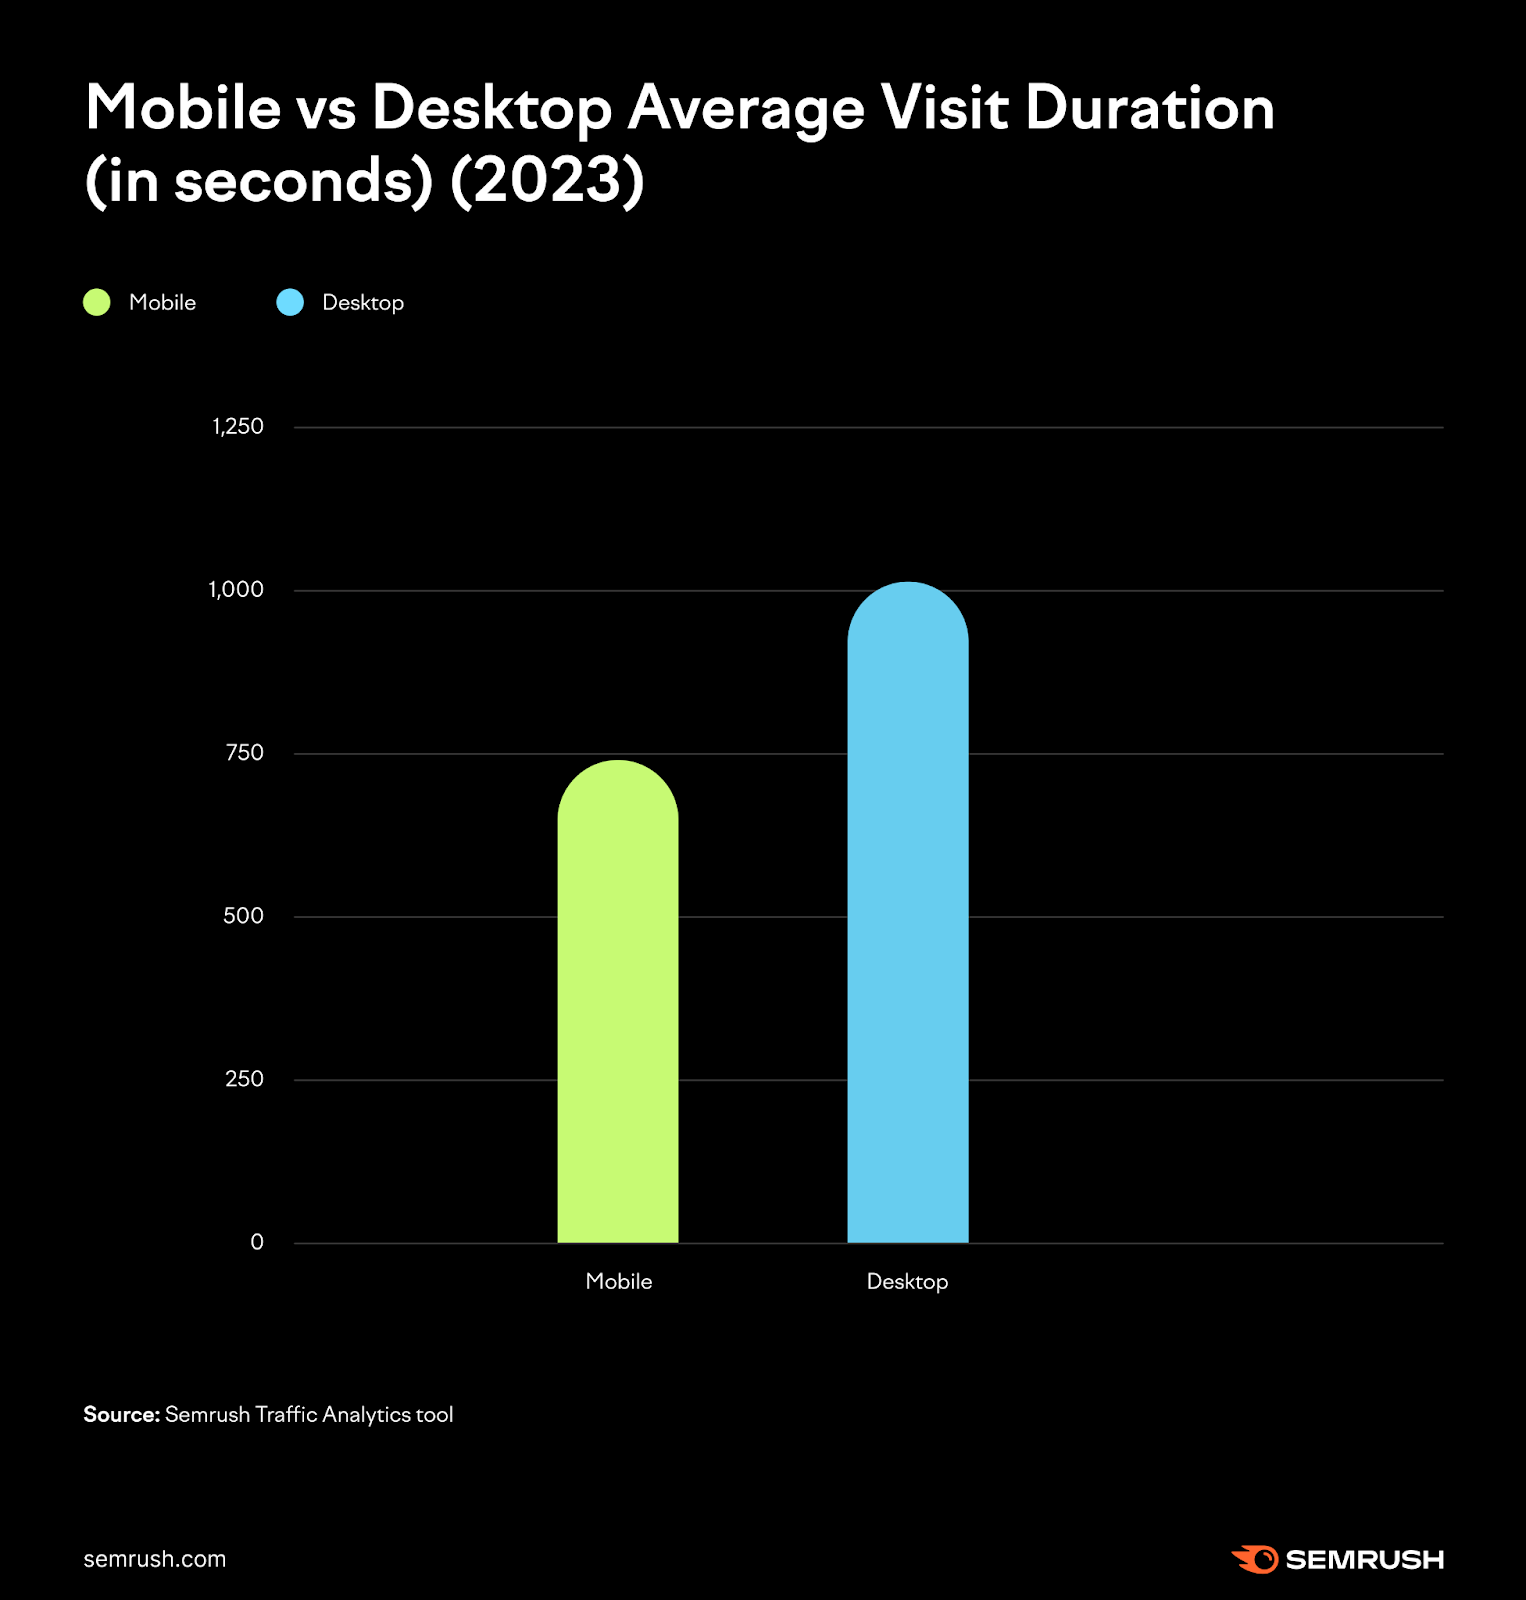 A chart showing mobile vs desktop average visit duration (in seconds) in 2023, using data from Traffic Analytics tool